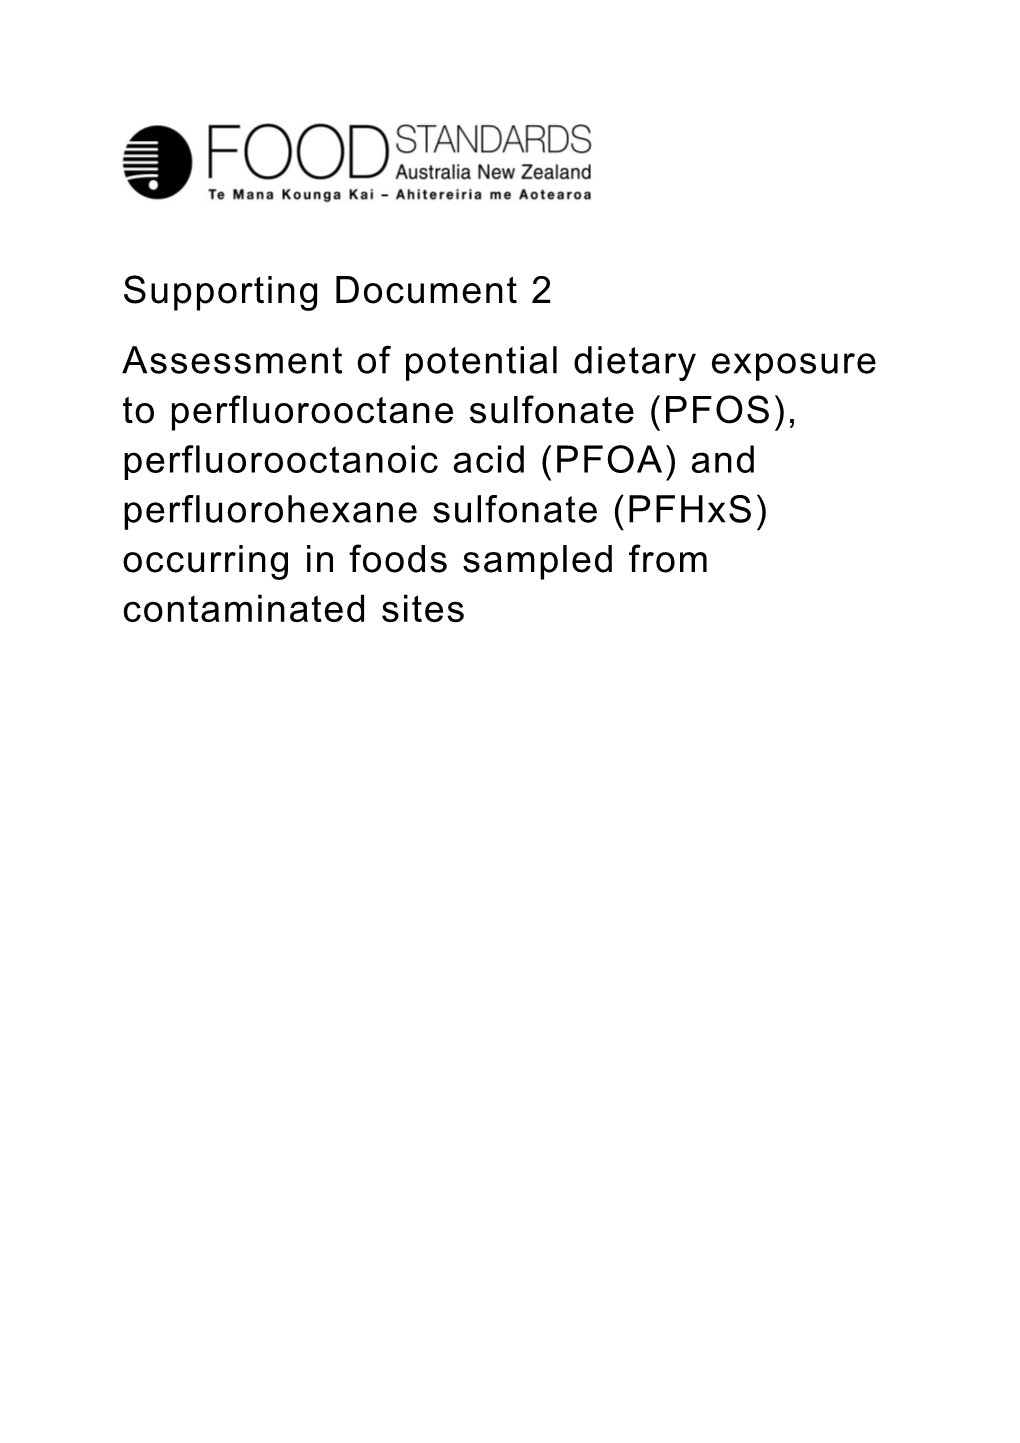 6PFOS, PFOA and Pfhxs Occurrence and Dietary Exposure in the Australian General Food Supply